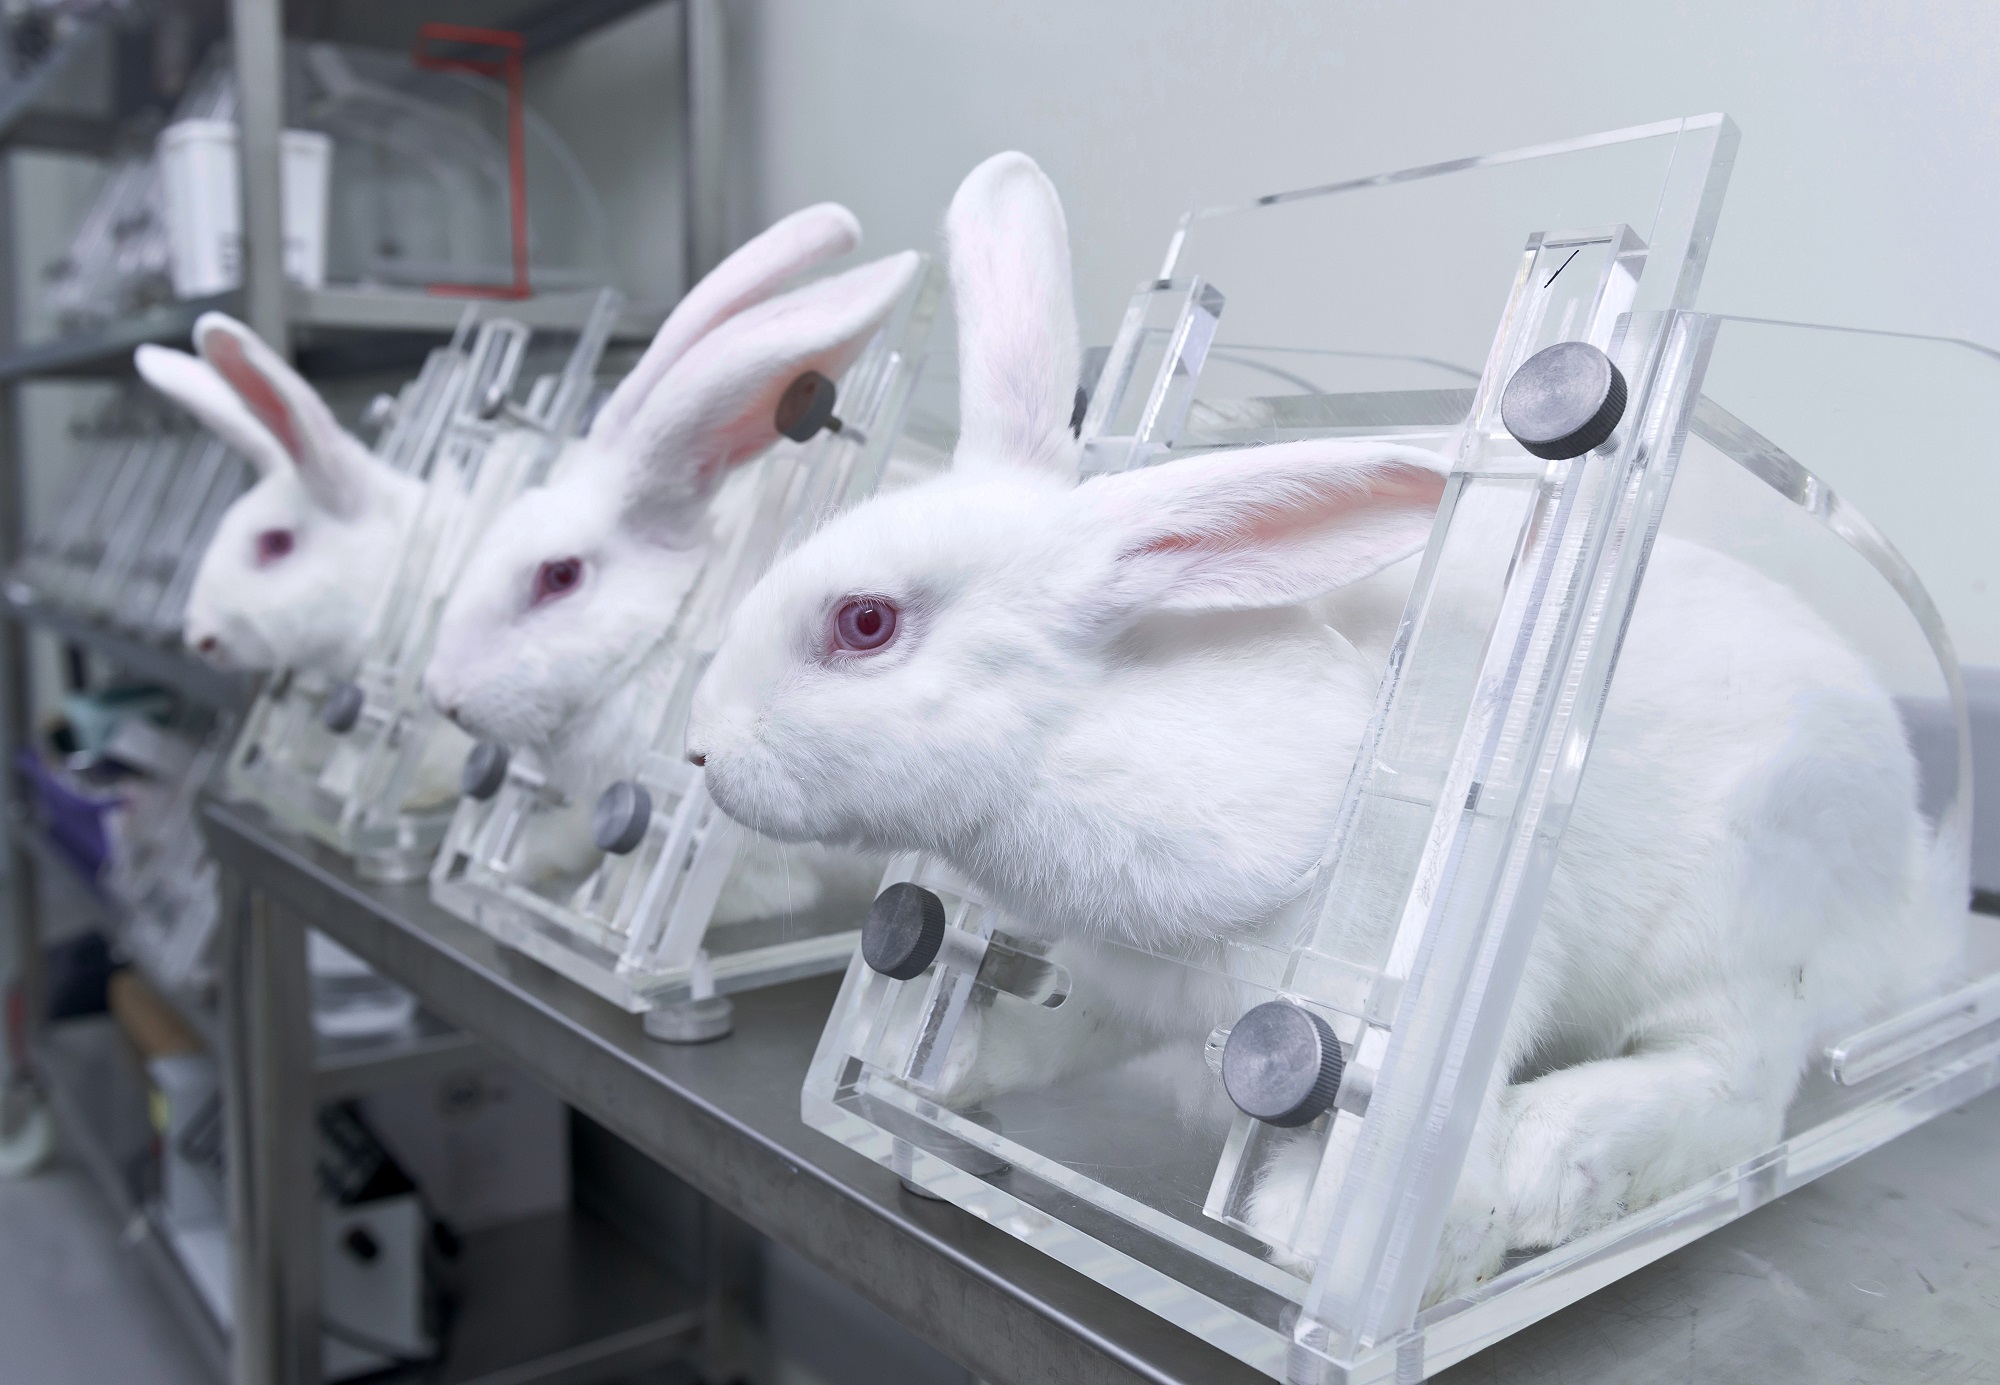 Image shows rabbits in lab.